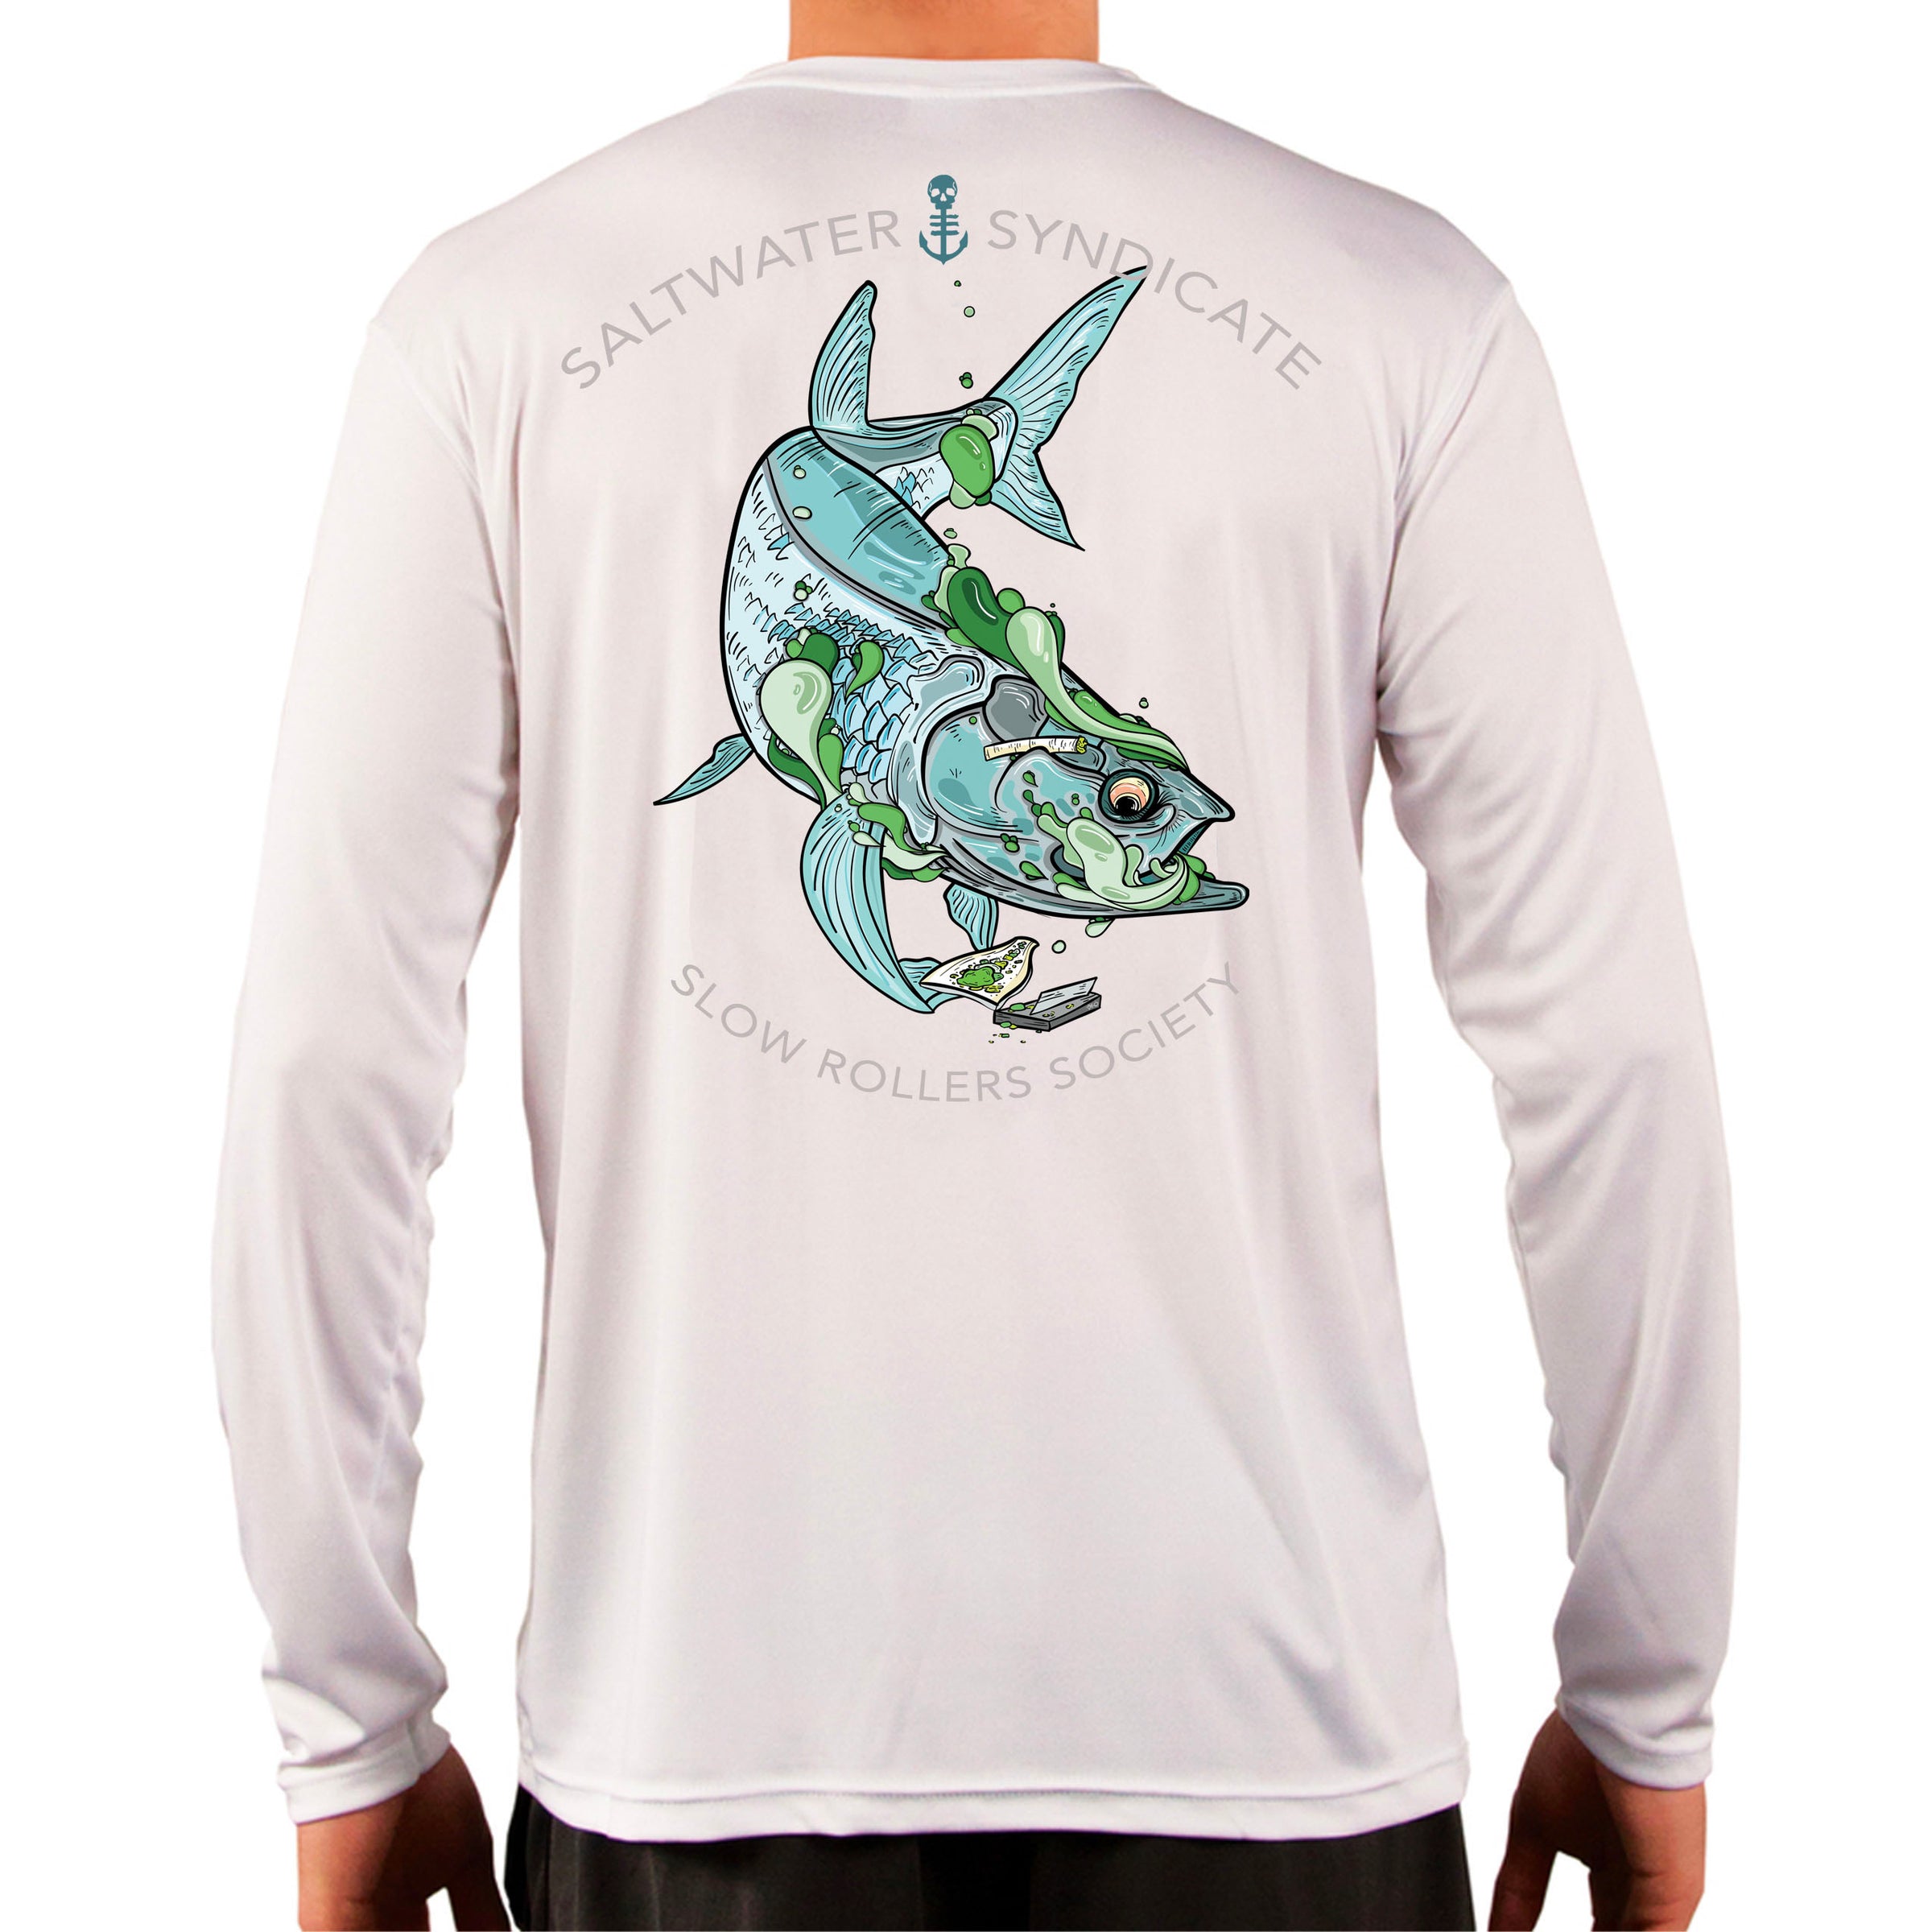 Slow Rollers Society Performance Fishing Shirt - White – Saltwater Syndicate